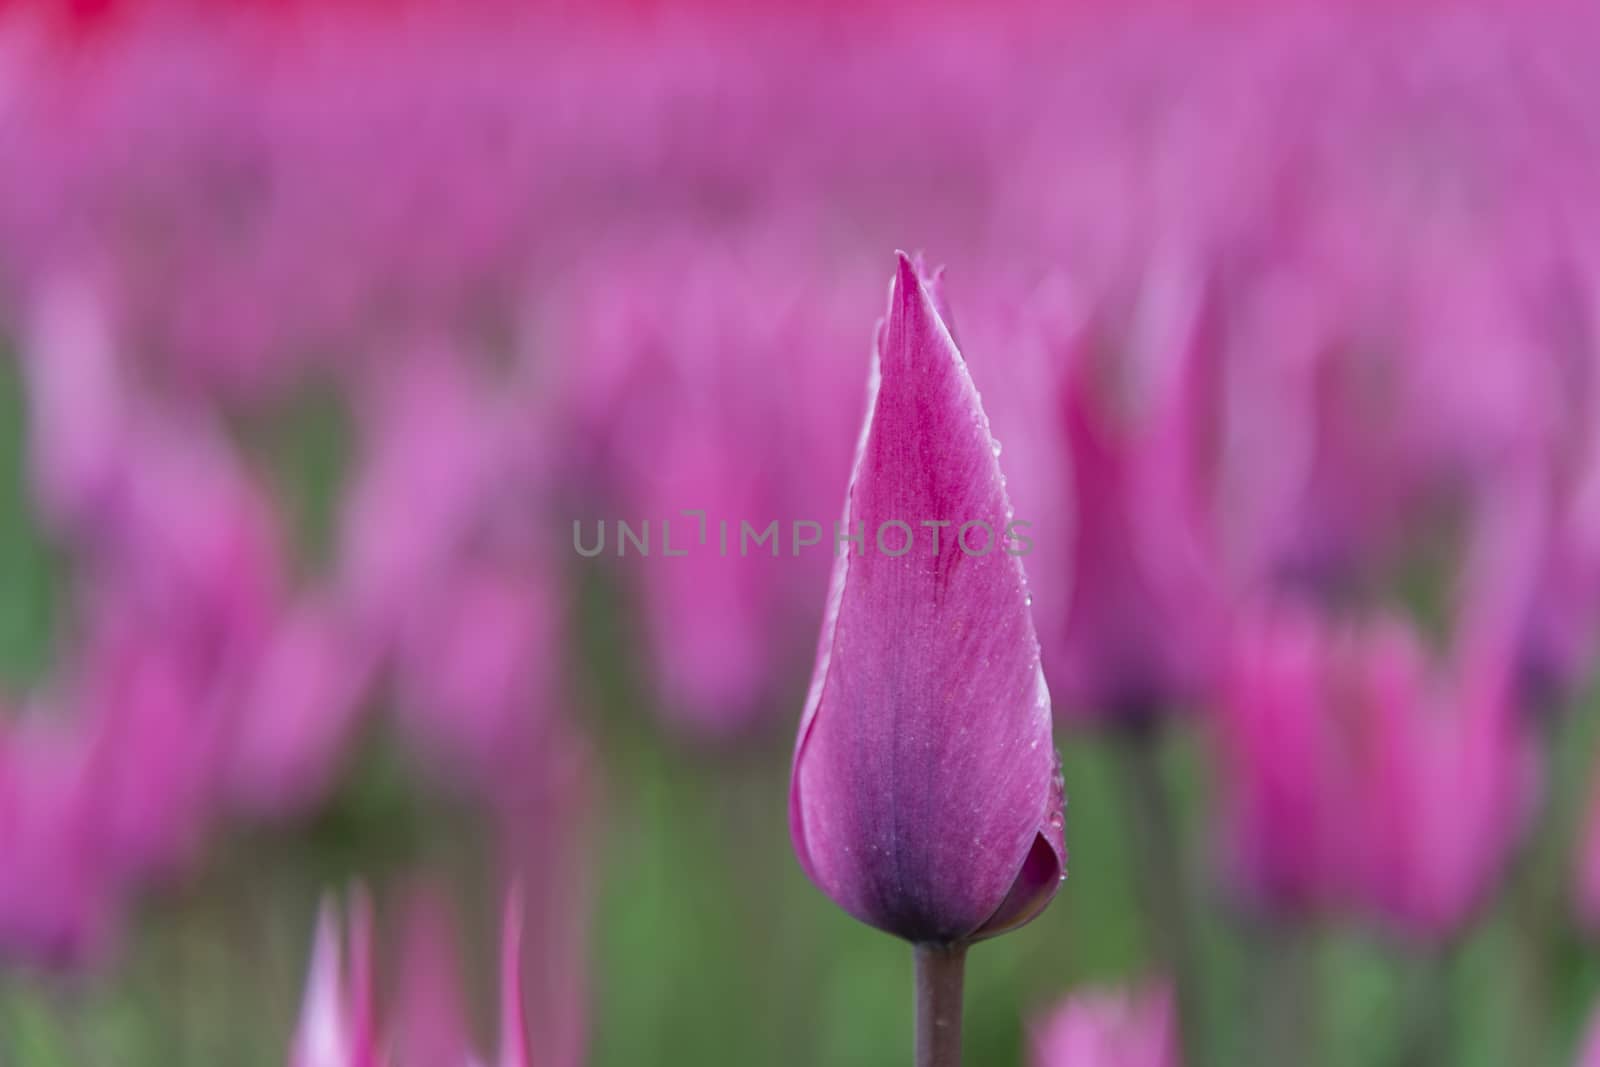 Close up of a dark purple tulips blossom flower under the rain in the tulip field